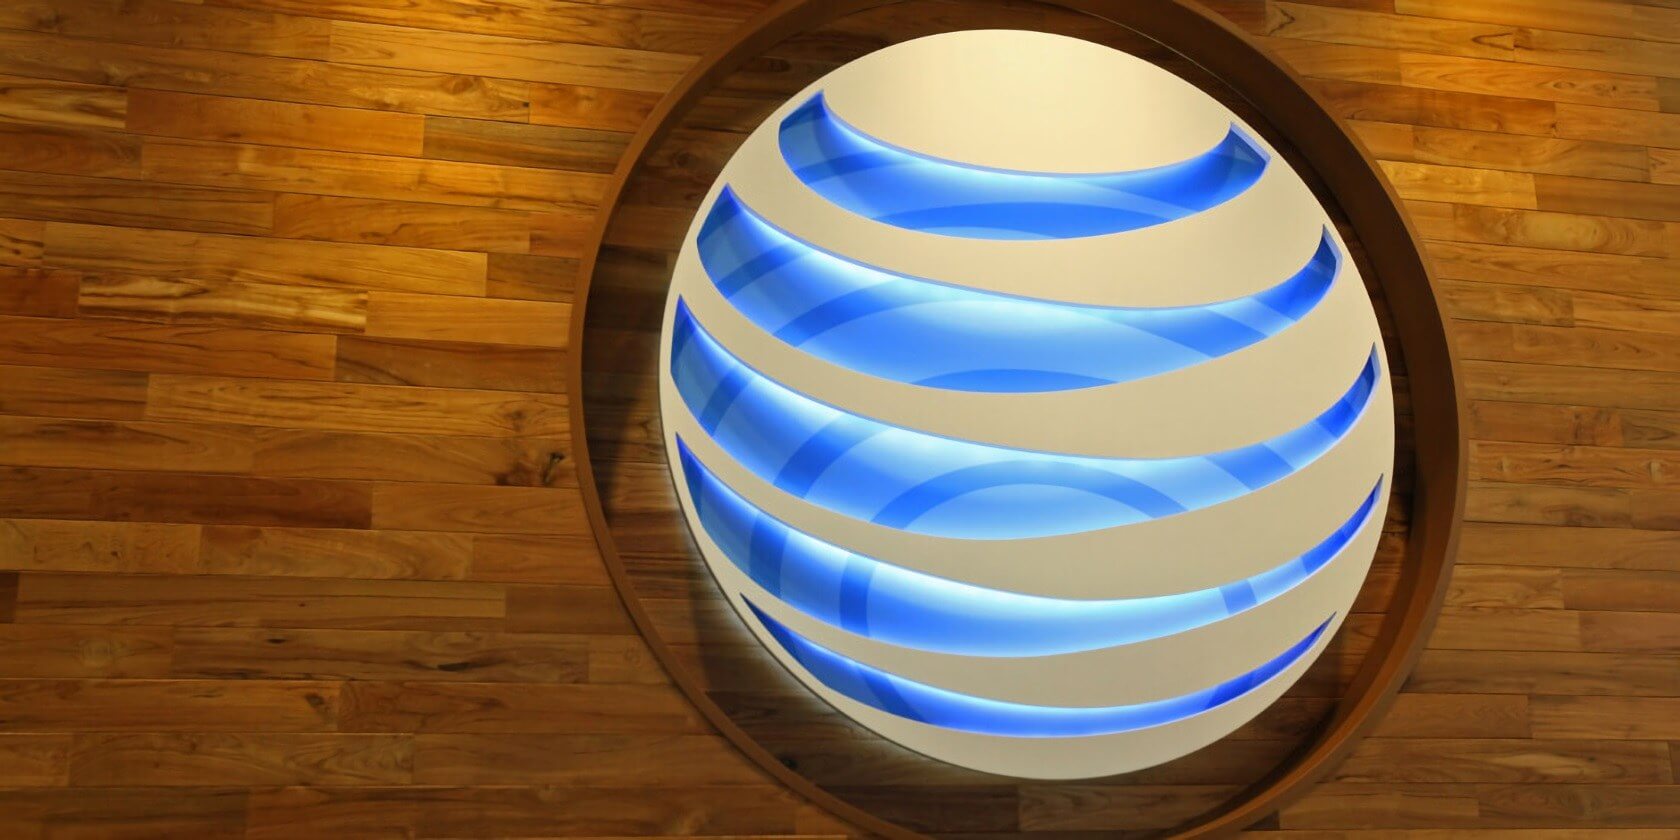 AT&T rolls out its 5G mobile network to seven additional cities